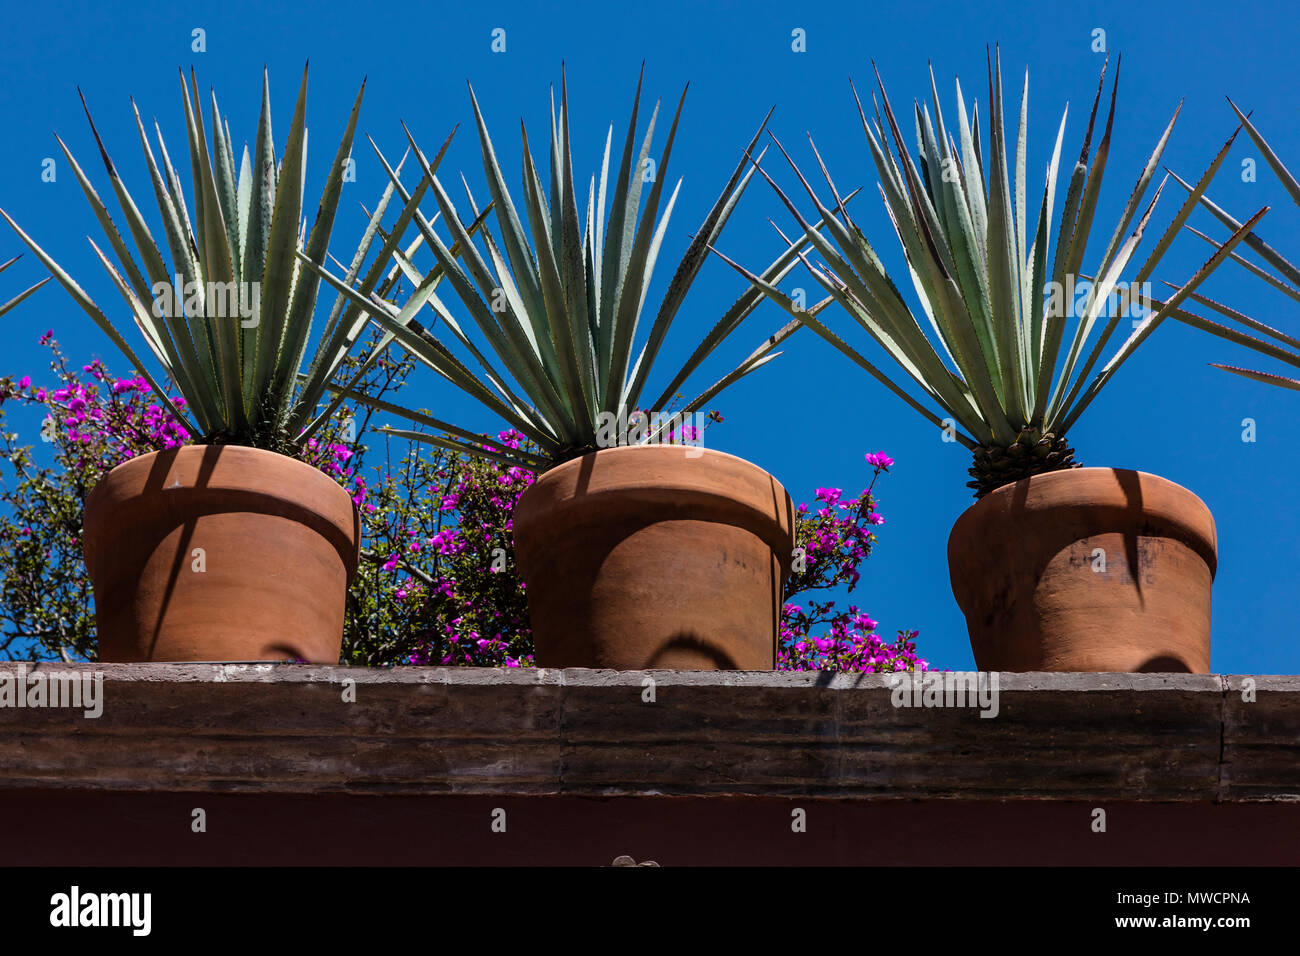 Potted plants on a rooftop - SAN MIGUEL DE ALLENDE, MEXICO Stock Photo